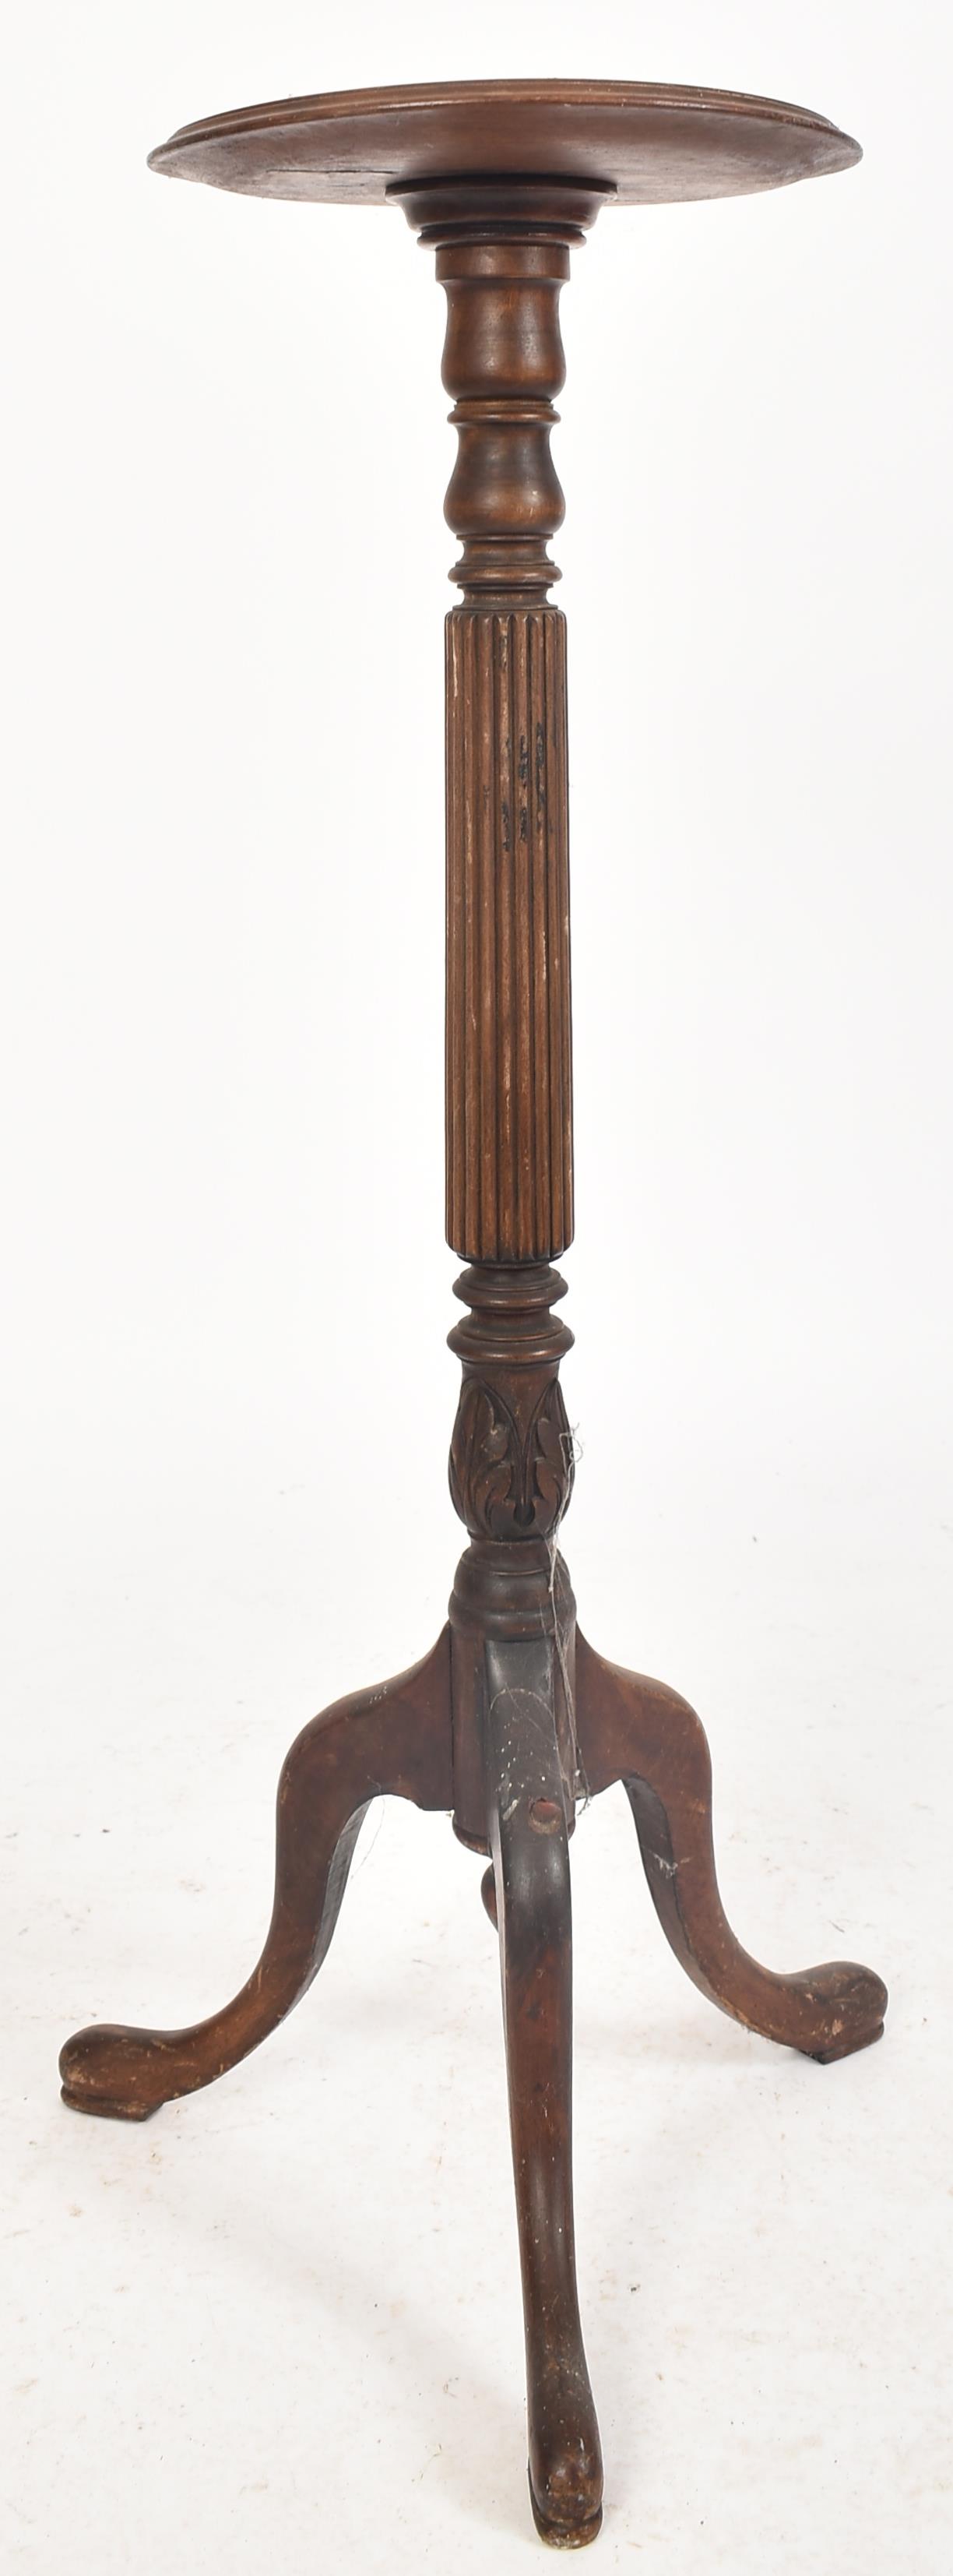 19TH CENTURY MAHOGANY REEDED COLUMN PLANT STAND TORCHERE